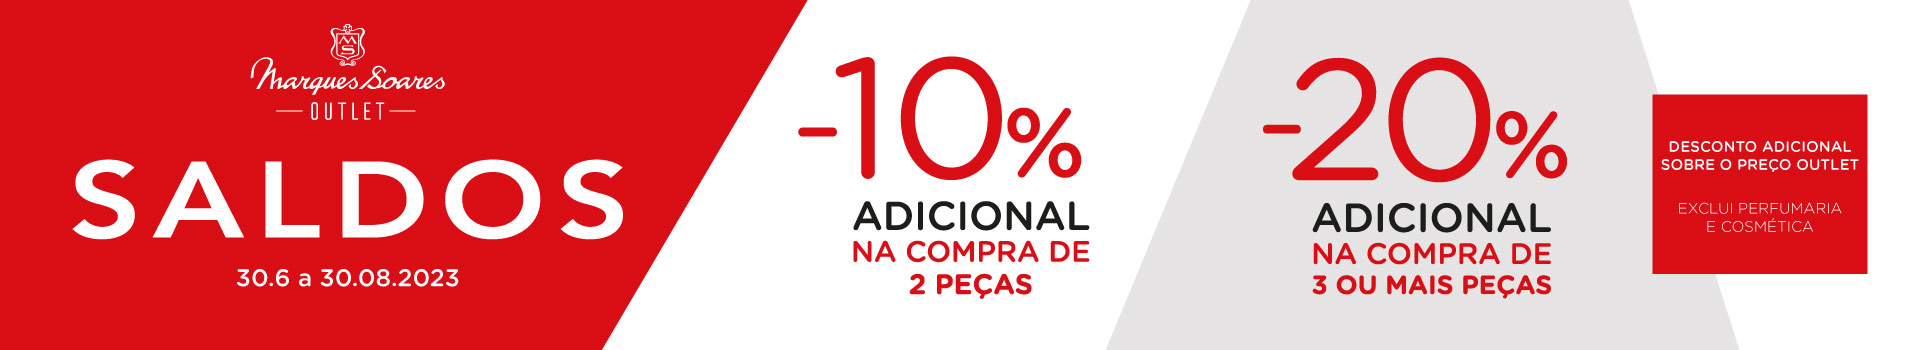 Outlet Marques Soares outono inverno